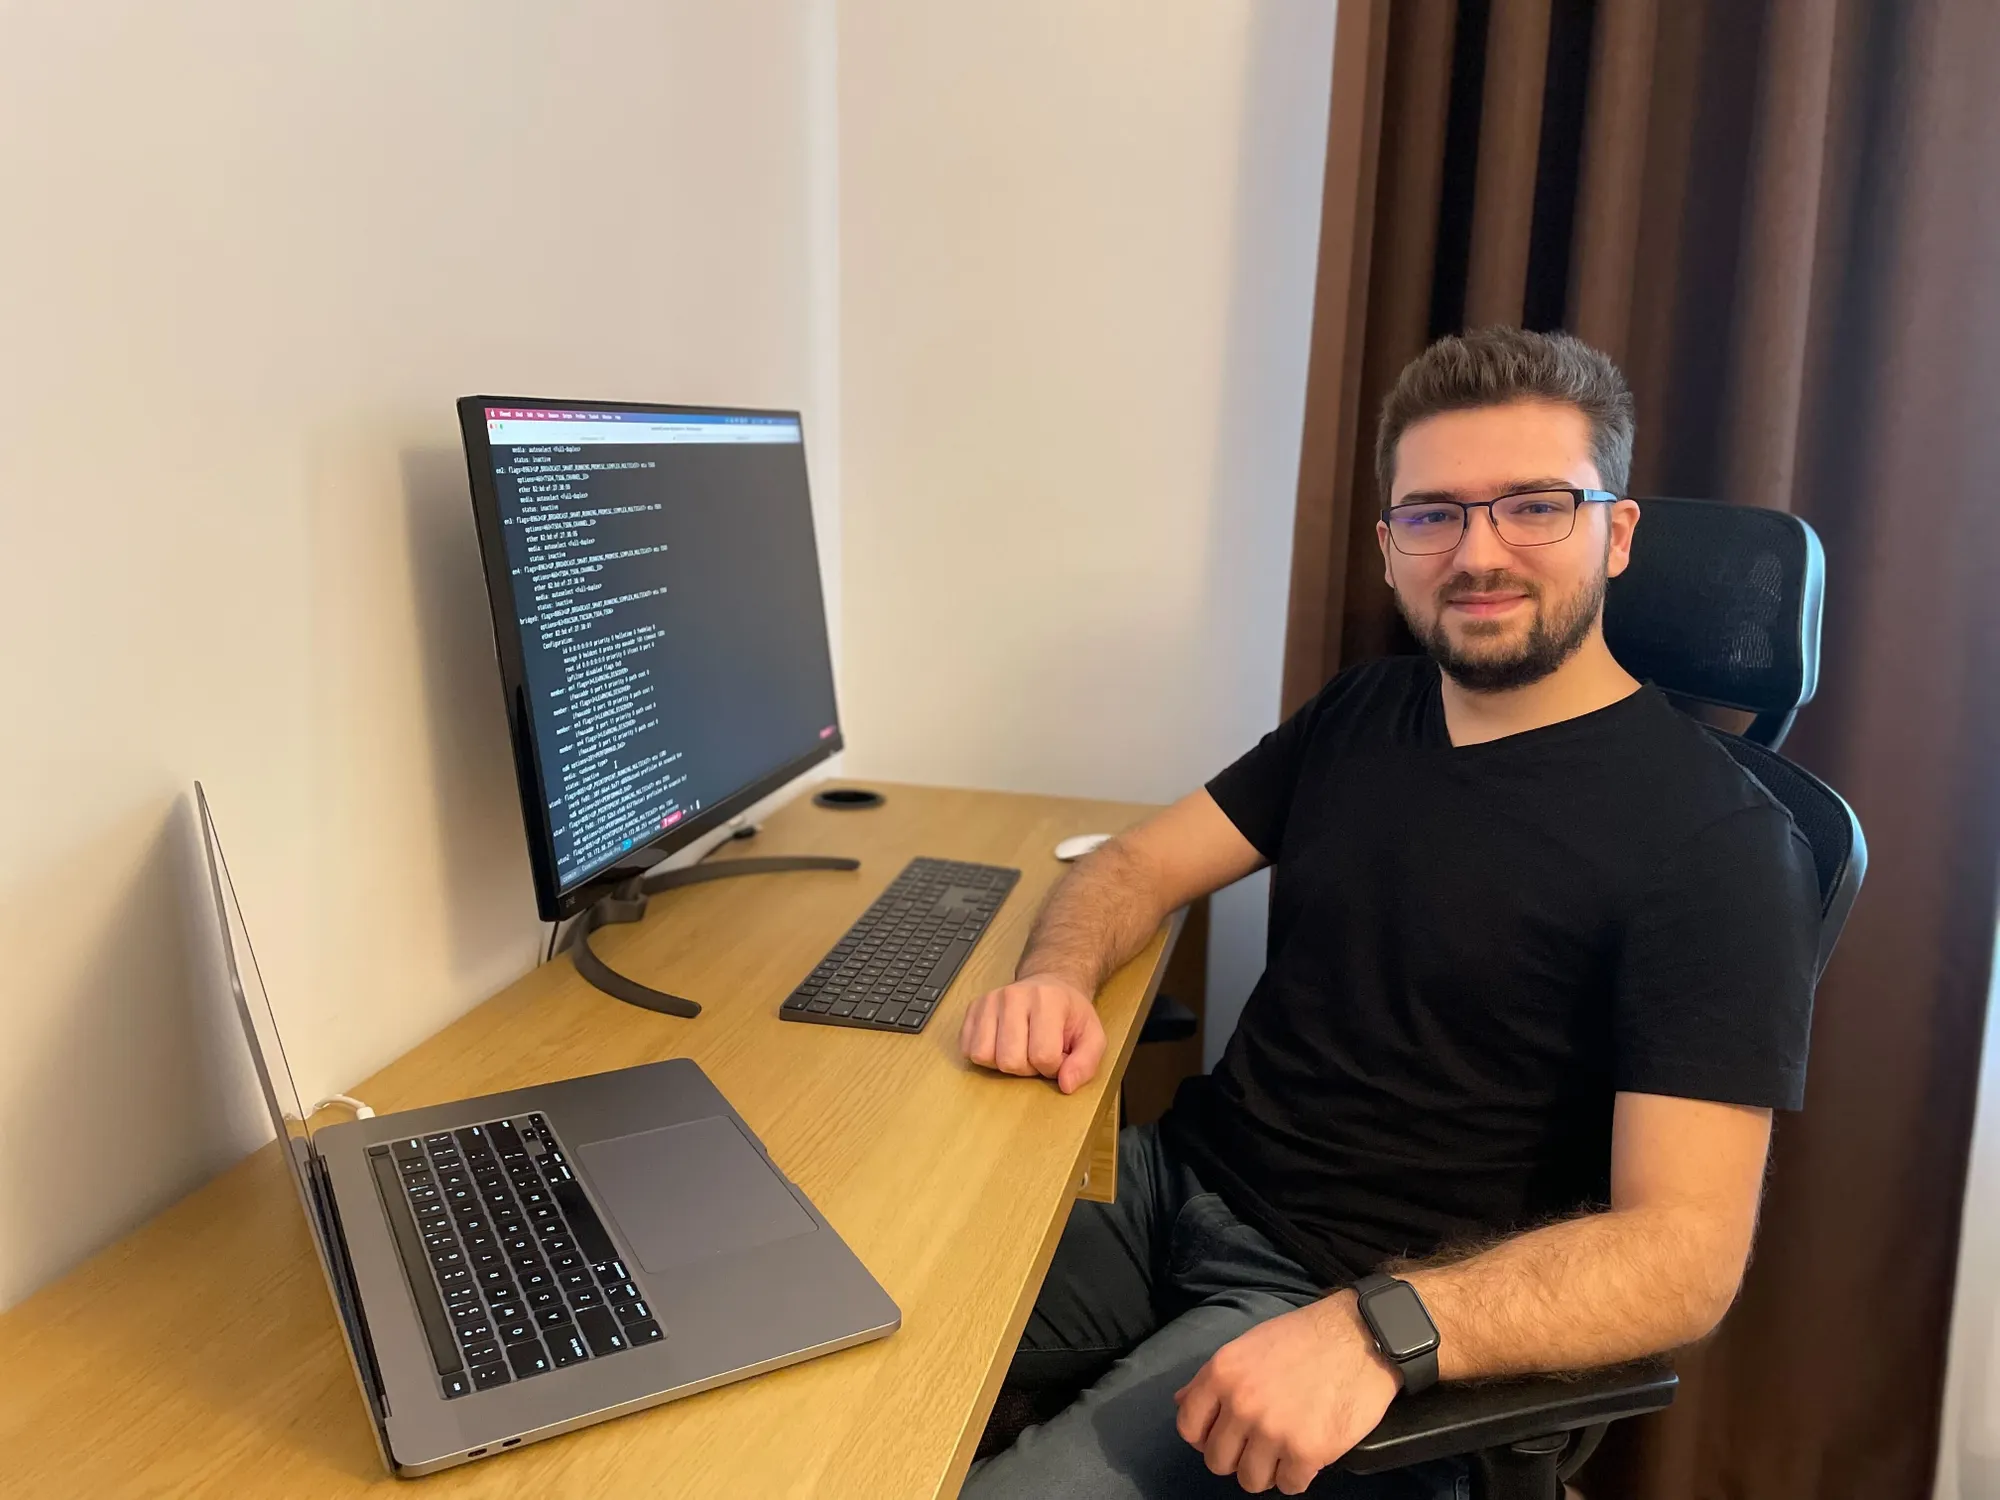 Adobe Software Engineer, Cosmin Ionita, sitting in his home office in front of his laptop and computer monitor.